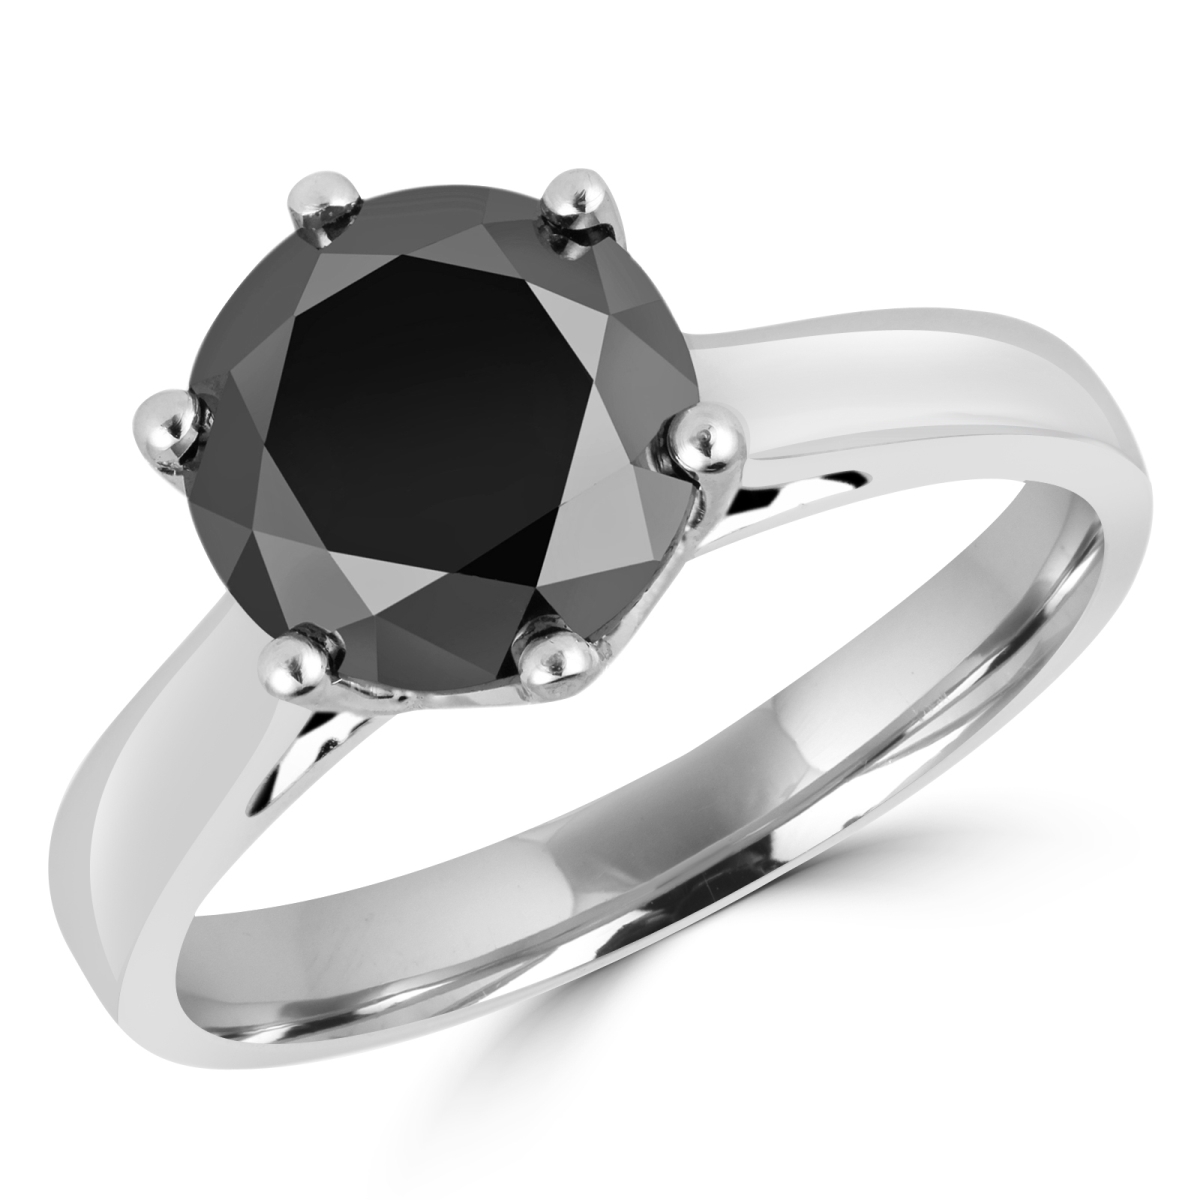 Picture of Majesty Diamonds MD170223-7.75 0.87 CT Round Black Diamond 6 Prong Solitaire Engagement Ring in 14K White Gold - Size 7.75